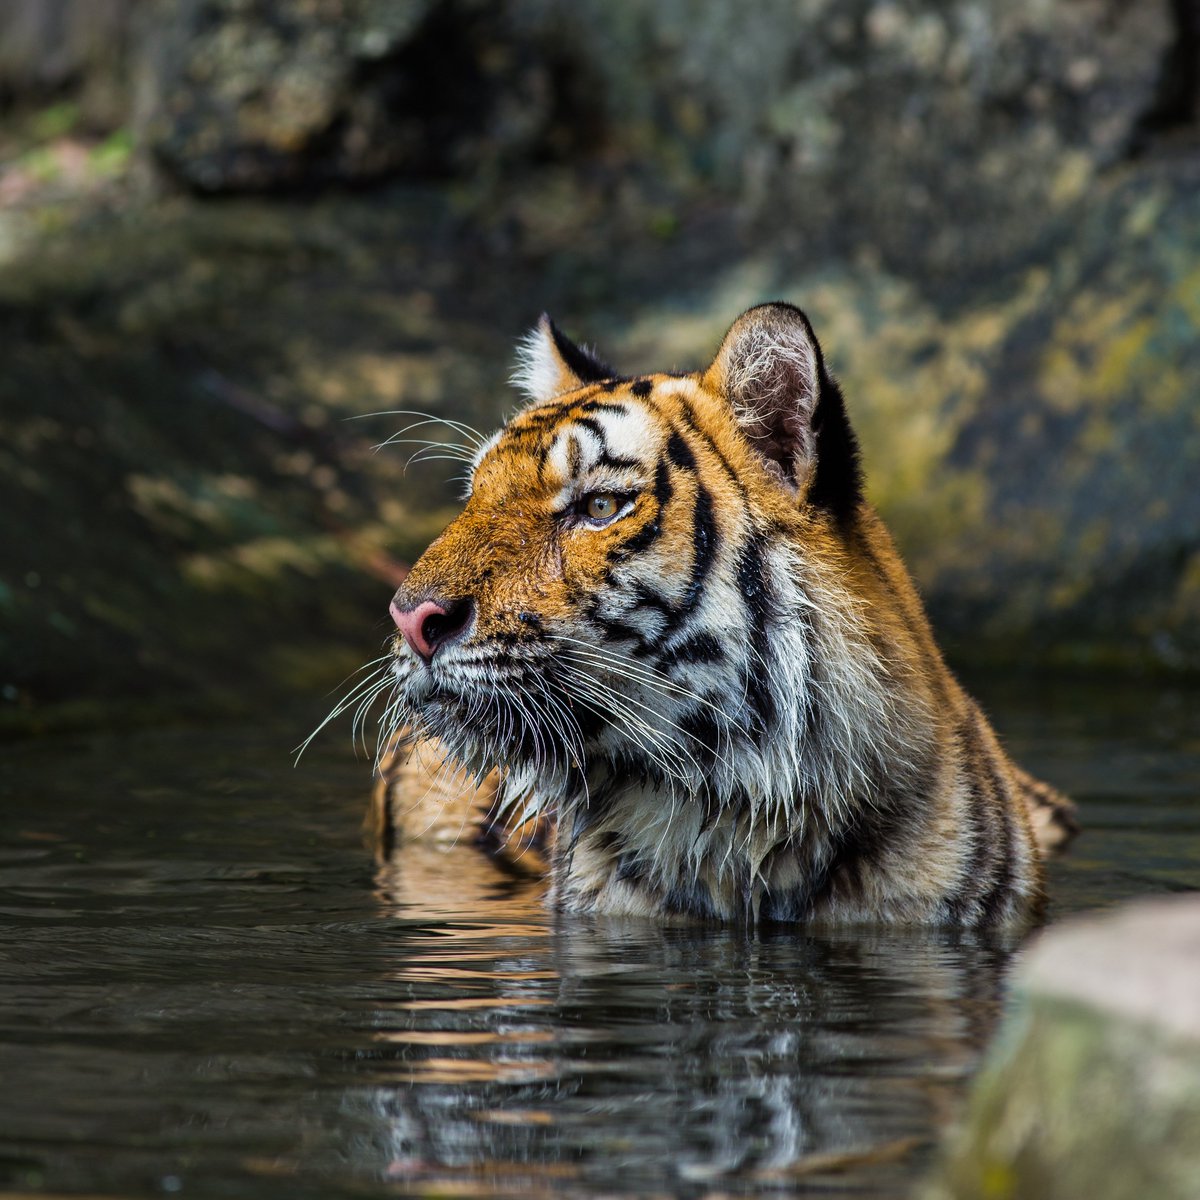 Cooling off! ☀️🌊

#TigerTuesday #Tiger #WildlifePhotography #Wildlife